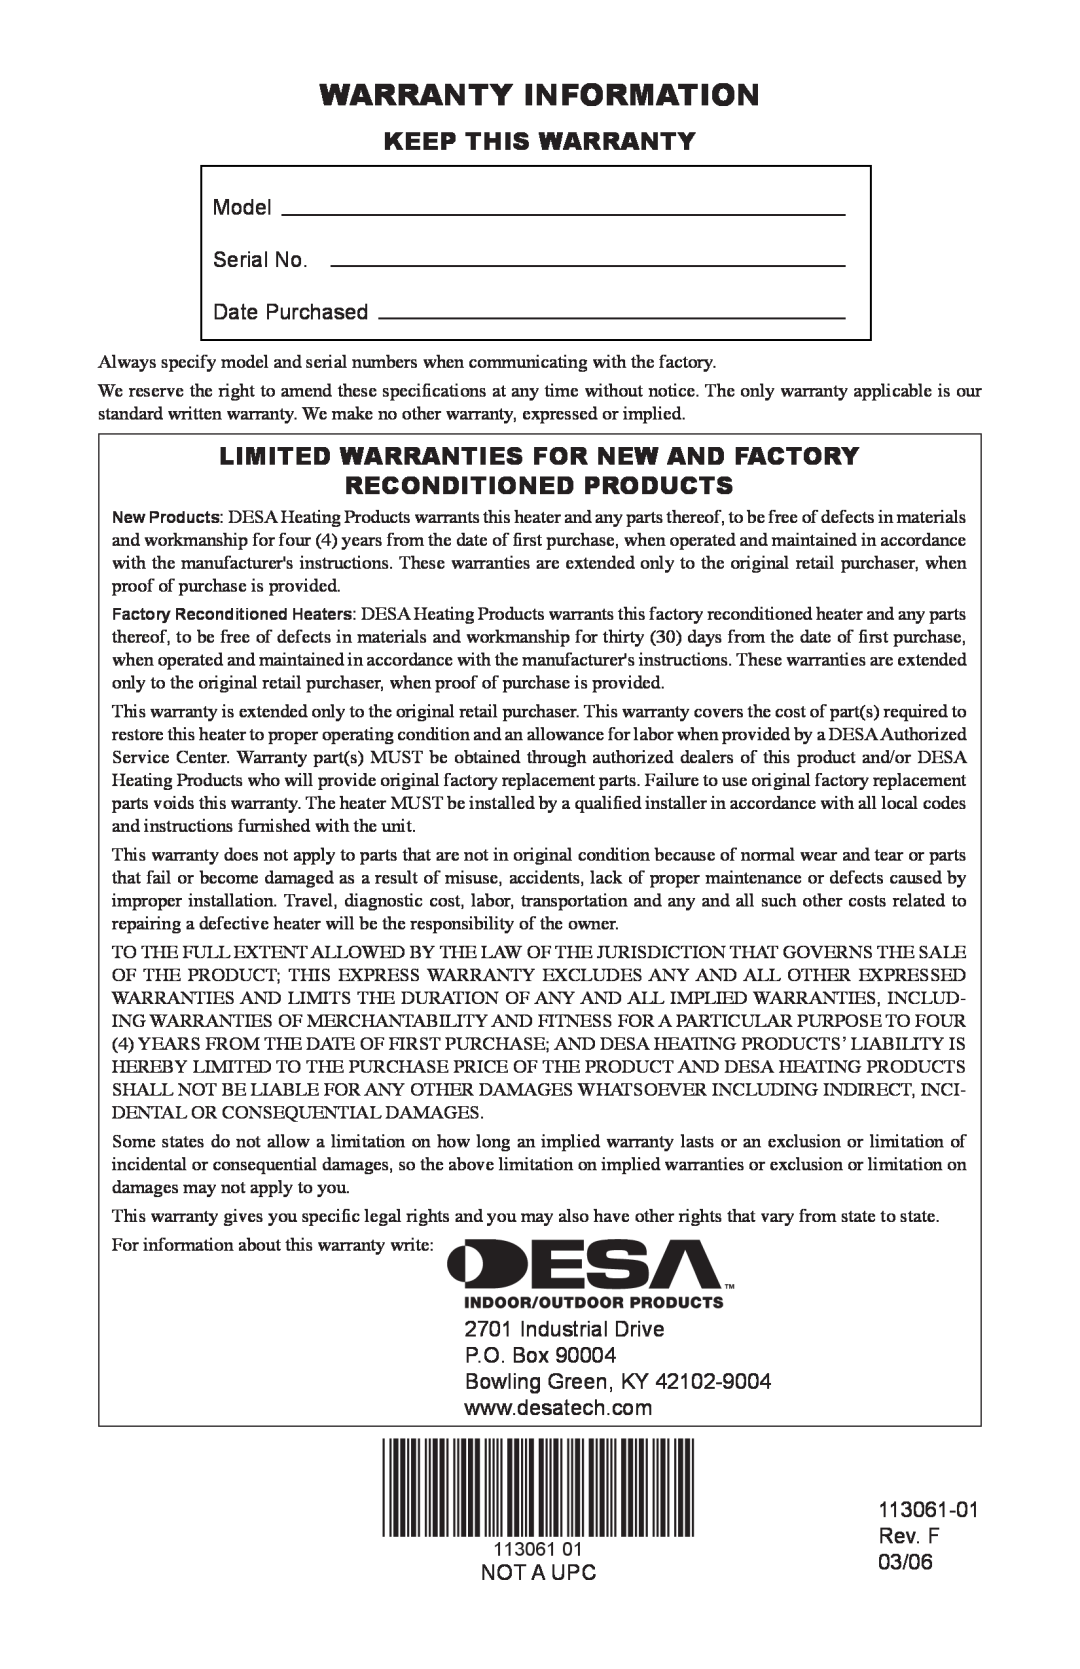 Desa VP30BTA Warranty Information, Keep This Warranty, Limited Warranties For New And Factory, Reconditioned Products 